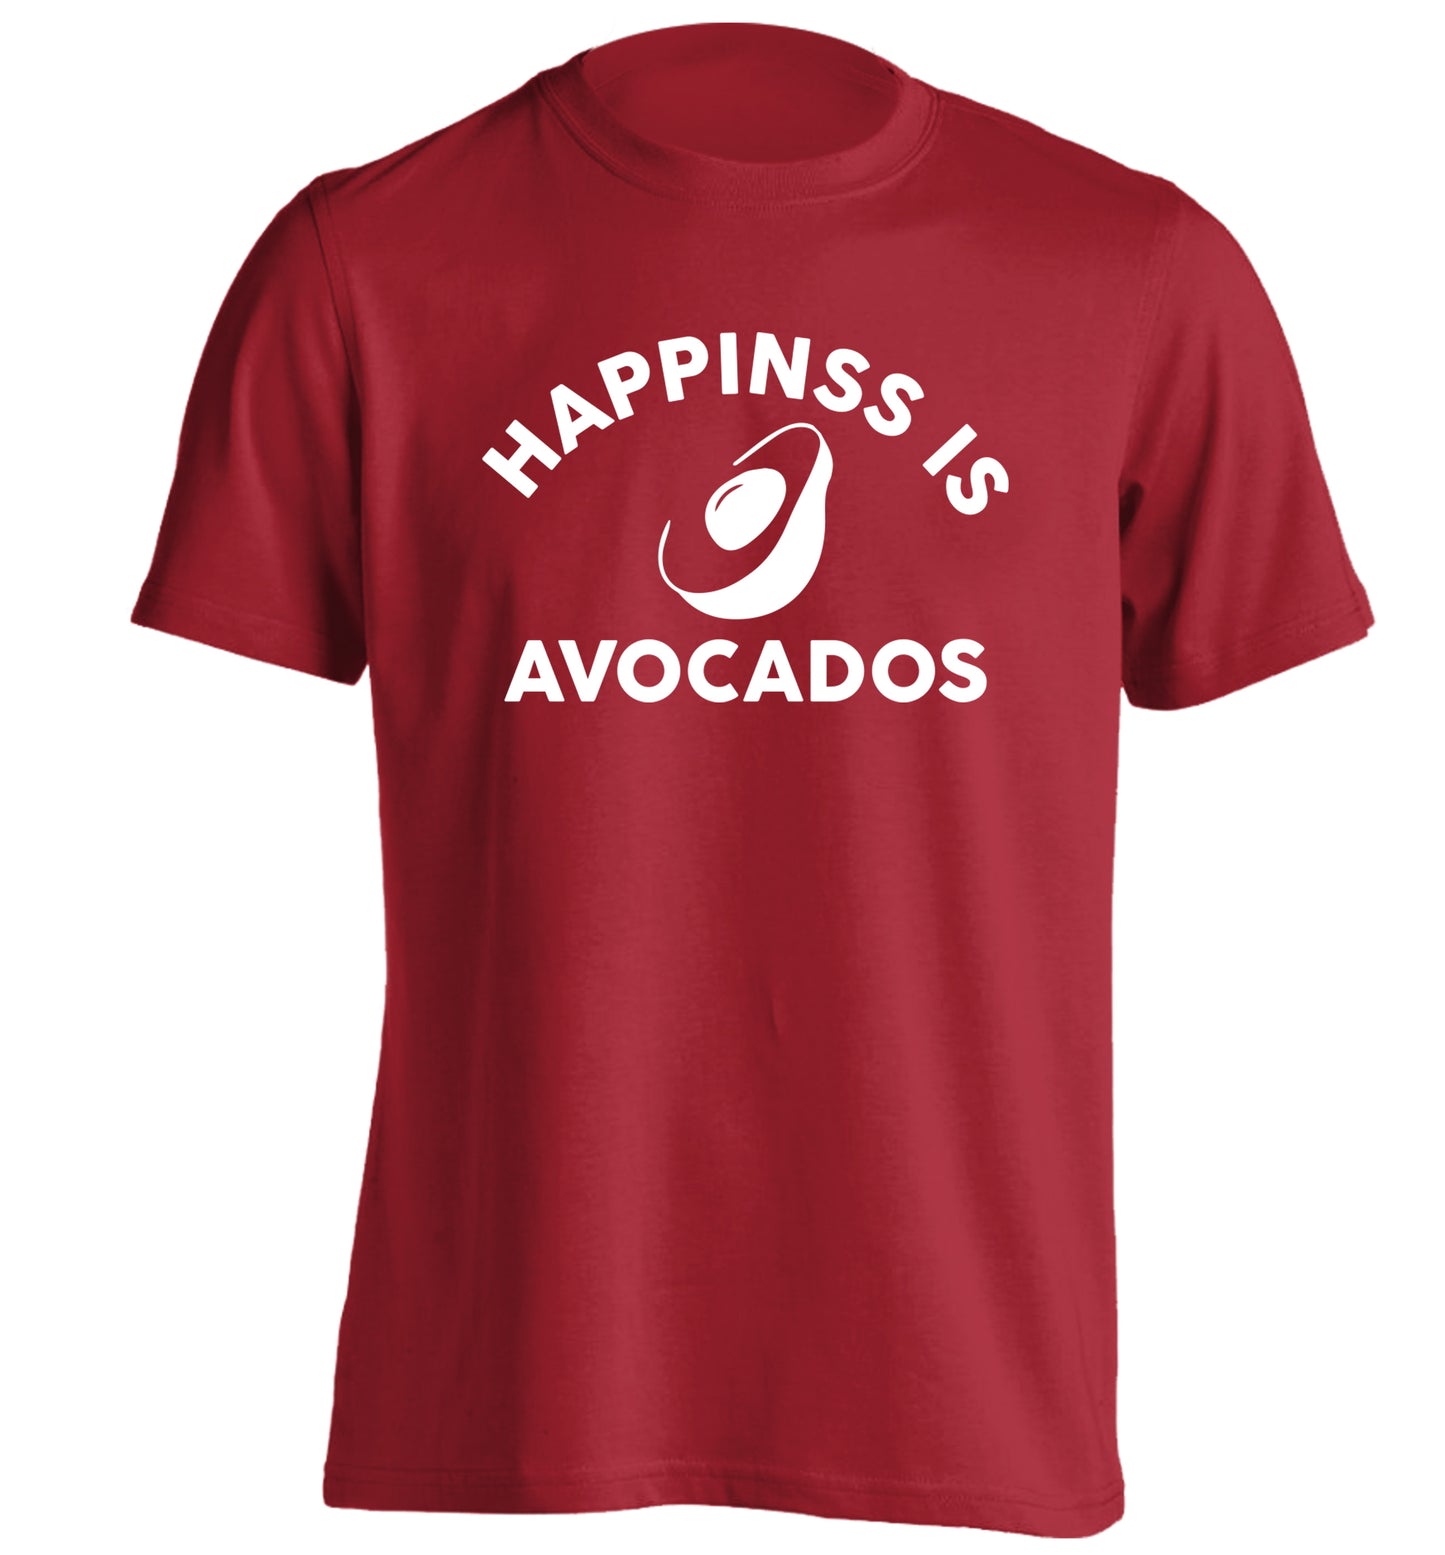 Happiness is avocados adults unisex red Tshirt 2XL